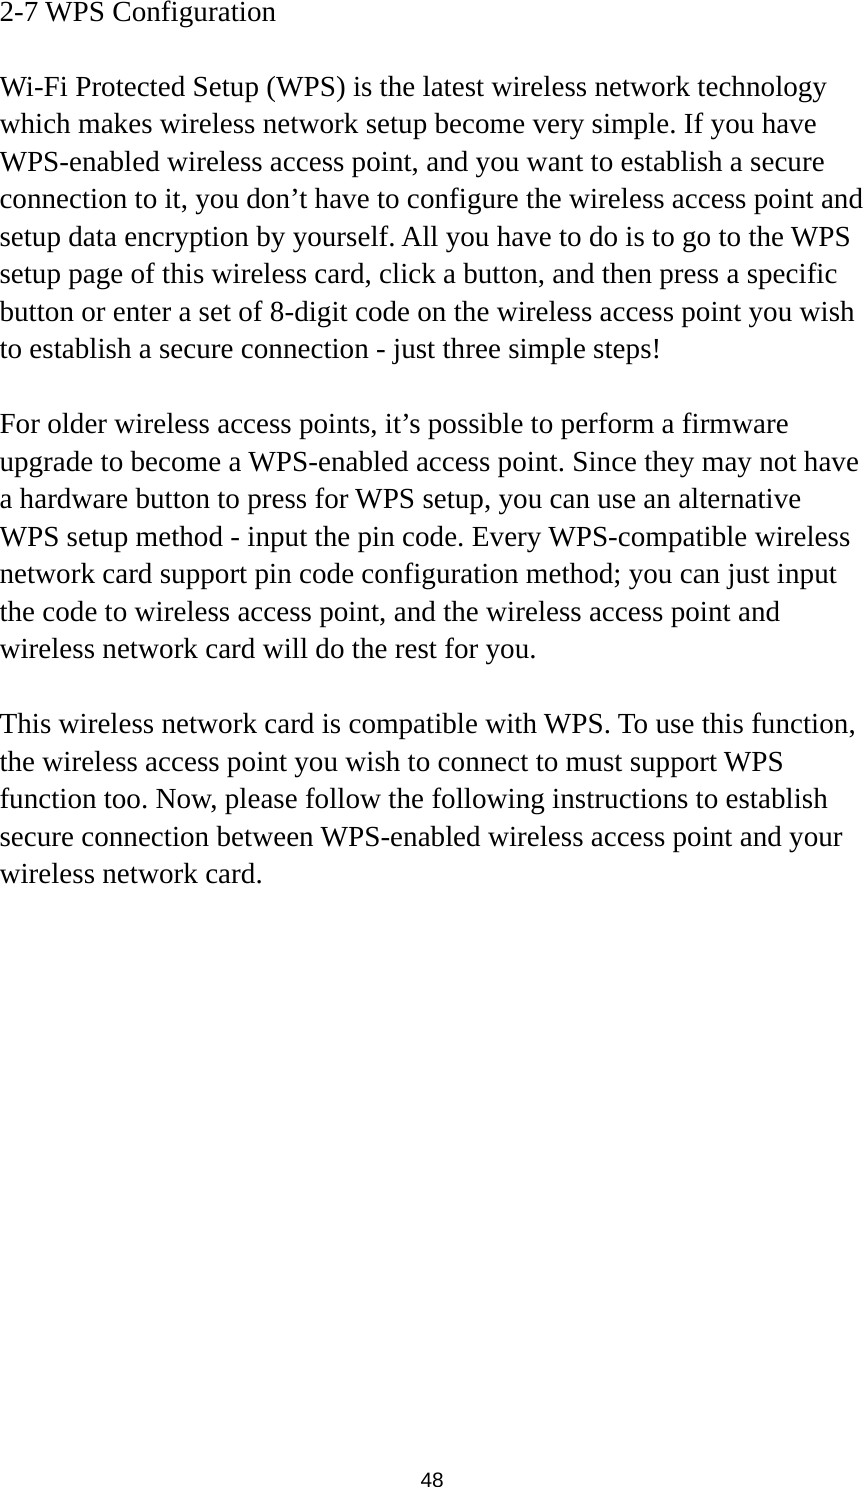  48 2-7 WPS Configuration  Wi-Fi Protected Setup (WPS) is the latest wireless network technology which makes wireless network setup become very simple. If you have WPS-enabled wireless access point, and you want to establish a secure connection to it, you don’t have to configure the wireless access point and setup data encryption by yourself. All you have to do is to go to the WPS setup page of this wireless card, click a button, and then press a specific button or enter a set of 8-digit code on the wireless access point you wish to establish a secure connection - just three simple steps!    For older wireless access points, it’s possible to perform a firmware upgrade to become a WPS-enabled access point. Since they may not have a hardware button to press for WPS setup, you can use an alternative WPS setup method - input the pin code. Every WPS-compatible wireless network card support pin code configuration method; you can just input the code to wireless access point, and the wireless access point and wireless network card will do the rest for you.  This wireless network card is compatible with WPS. To use this function, the wireless access point you wish to connect to must support WPS function too. Now, please follow the following instructions to establish secure connection between WPS-enabled wireless access point and your wireless network card. 